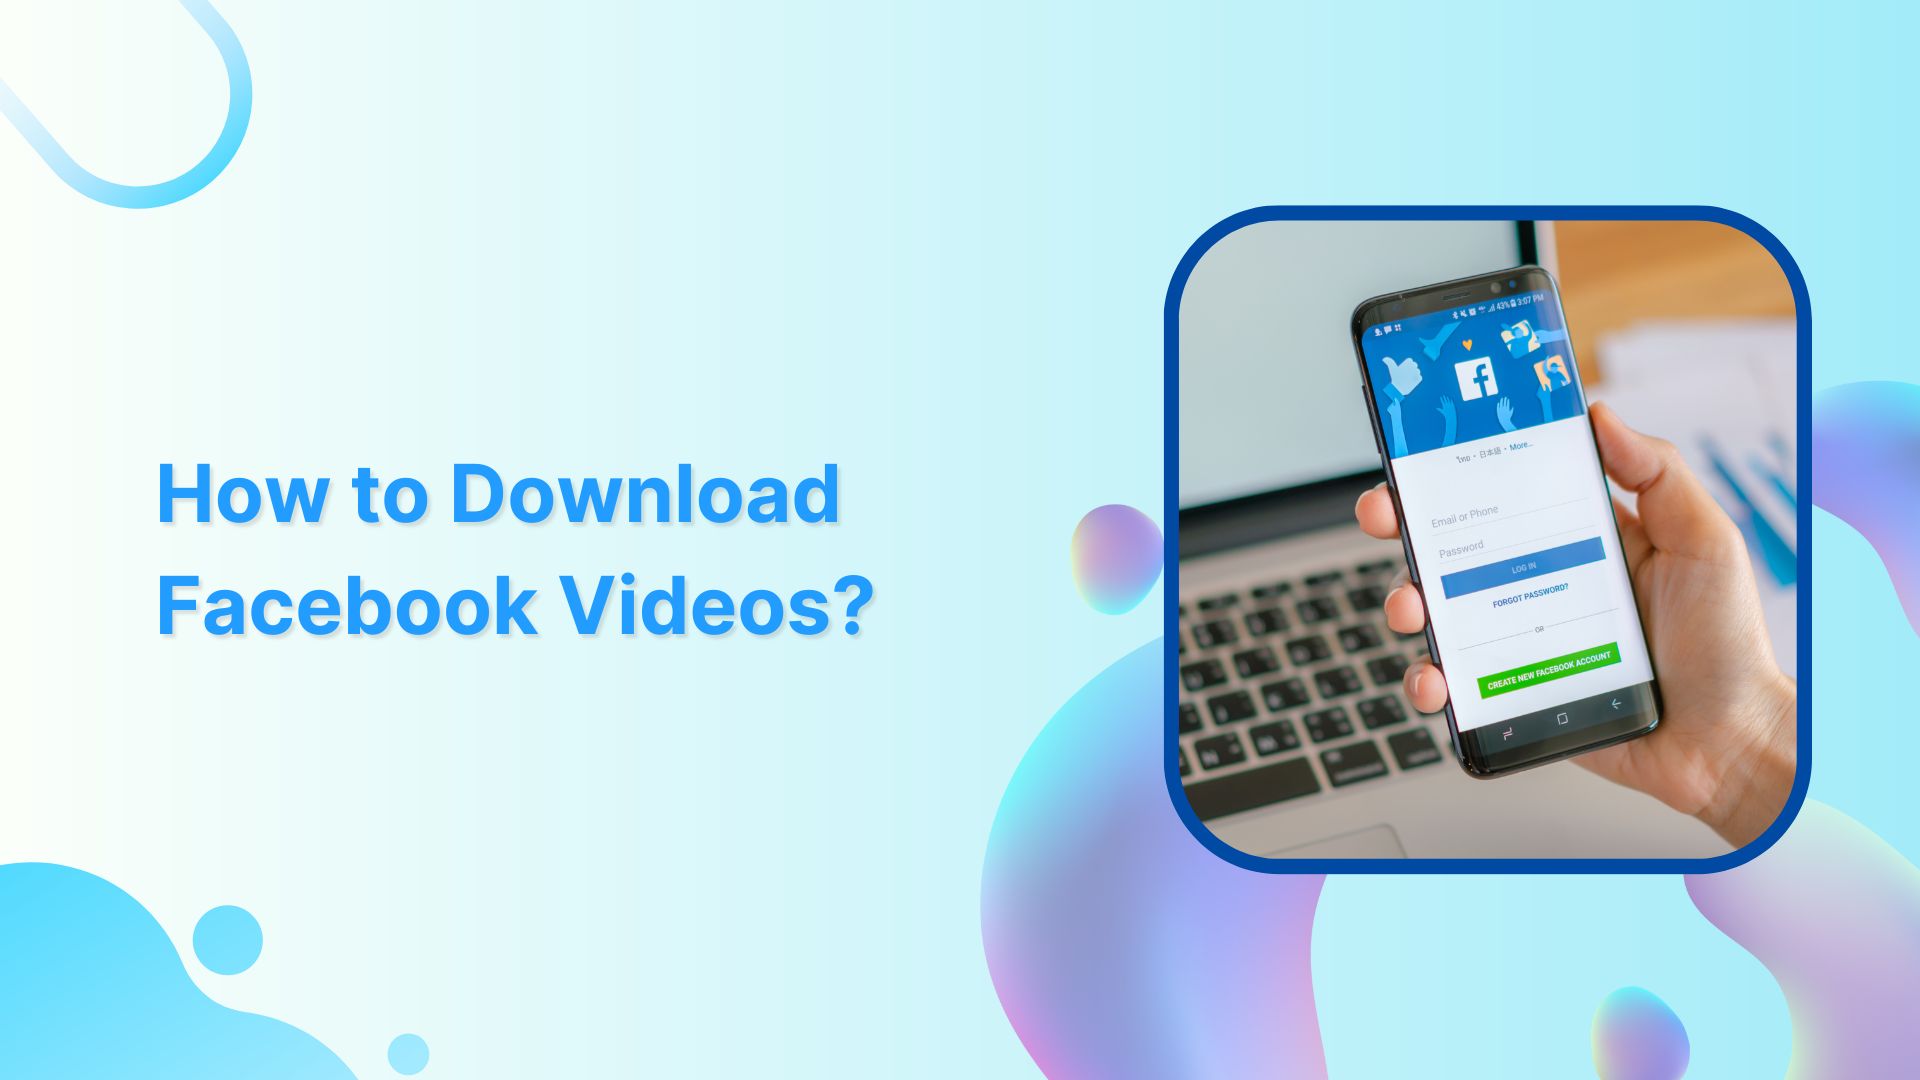 How to download Facebook videos?